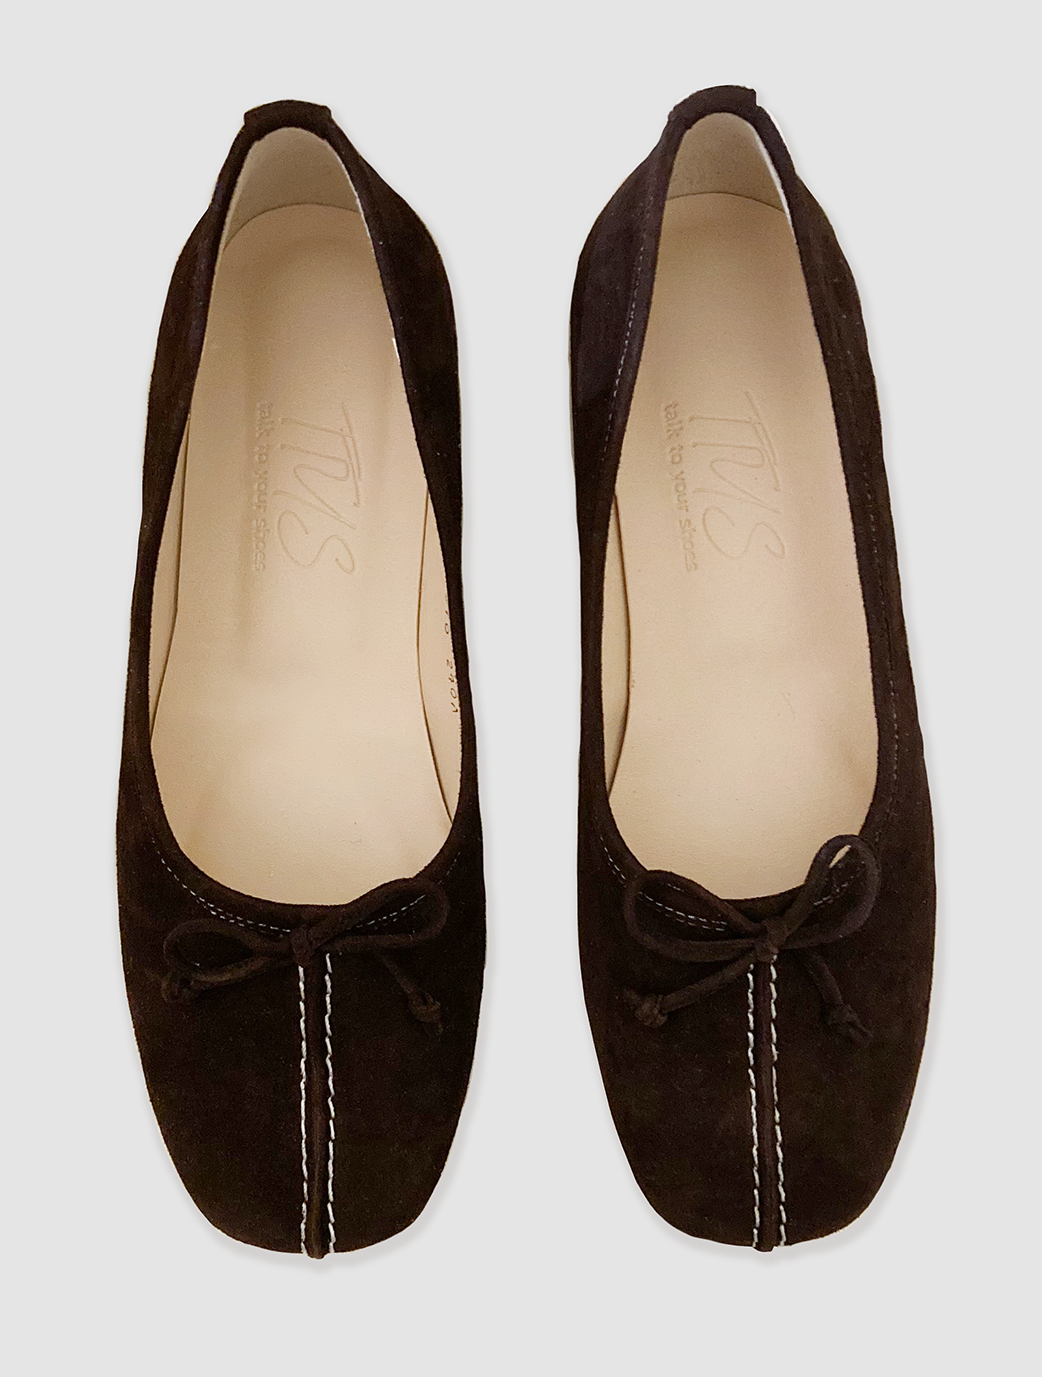 [Exclusive color] Suede stitch flat - Deep brown